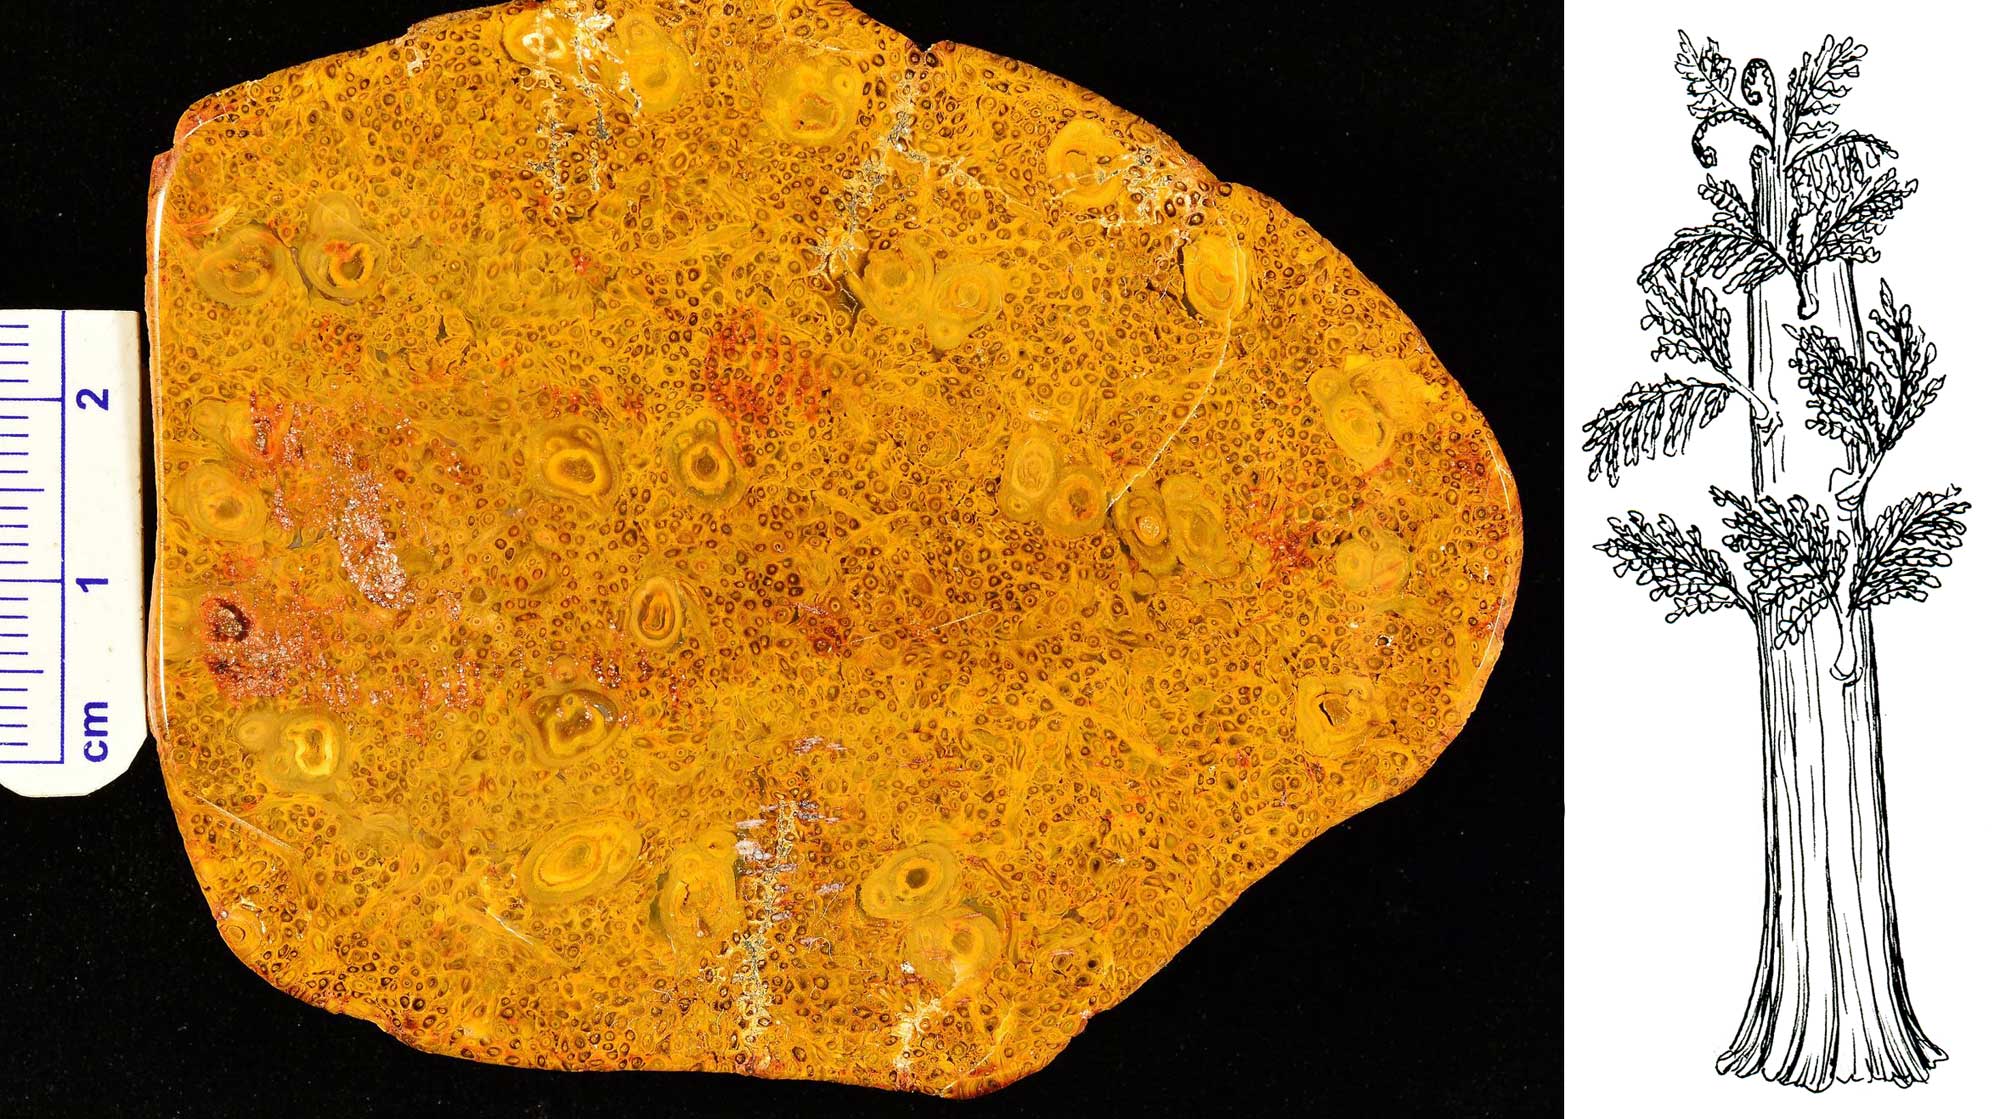 2-panel image of the tree fern Tempskya. Panel 1: Photograph of a cross section of a Cretaceous Tempskya stem from the Cretaceous of Wyoming. The photo shows a roughly oval stem section that is yellow-orange in color with smaller and larger circular structures. Scale bar is 2.5 centimeters. Panel 2: Drawing of a Tempskya as it may have looked in life. The drawing shows a plant with a thick trunk and a few compound leaves.